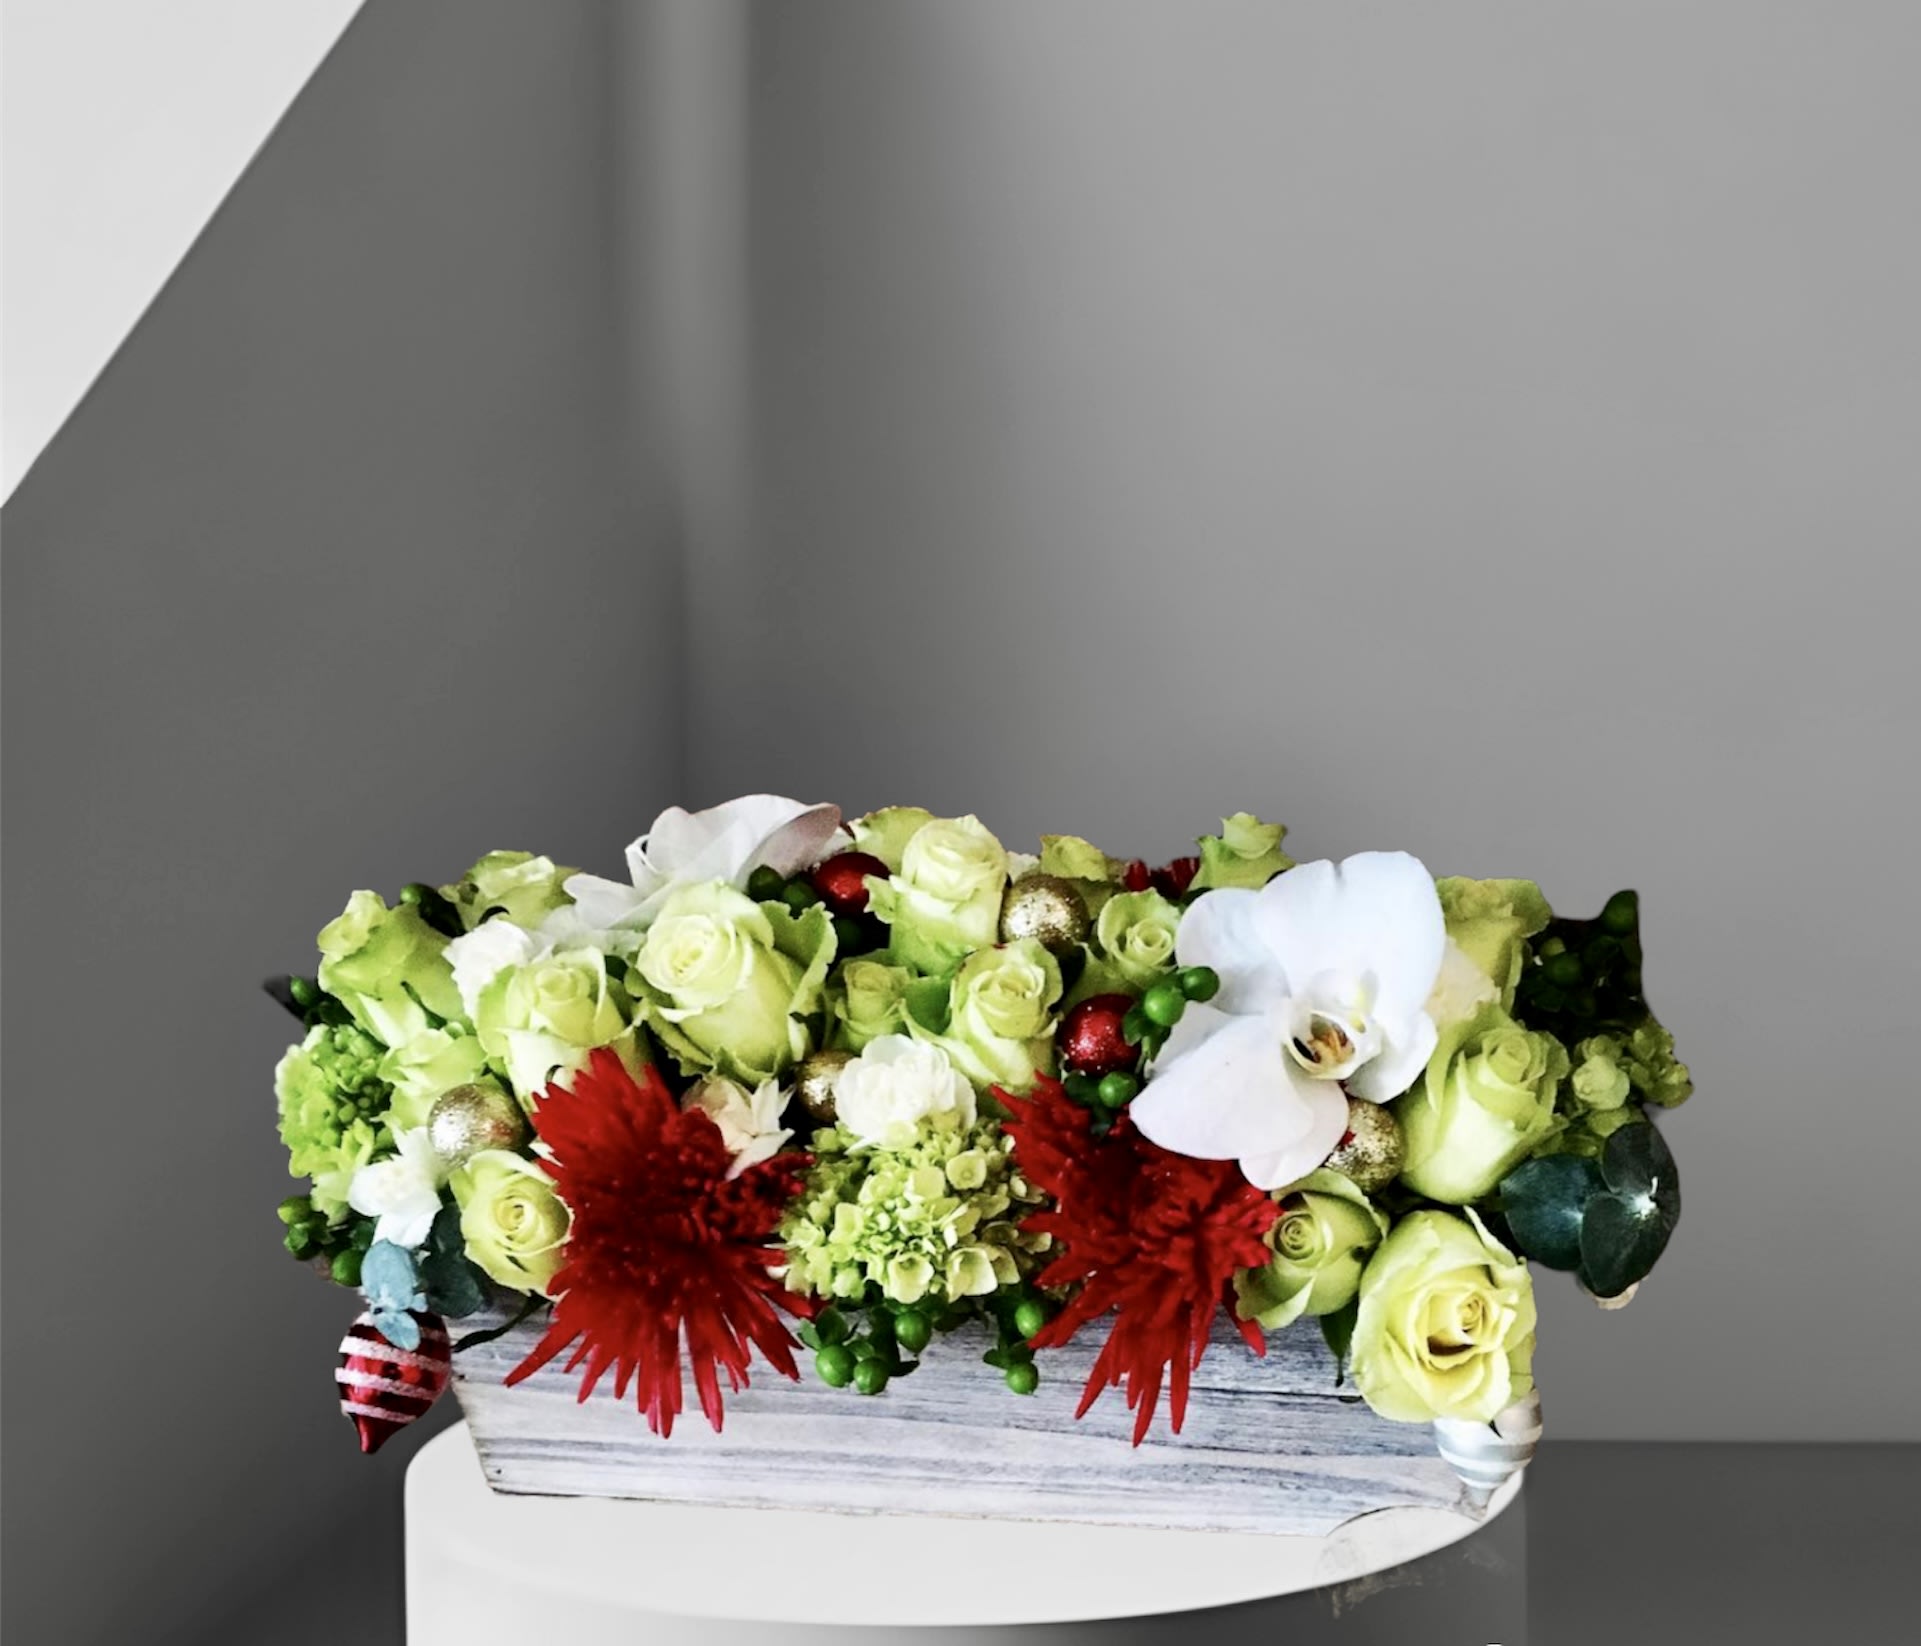 Holiday Centerpiece - A festive addition to your holiday table. An arrangement of holiday colored roses, hydrangea, hypericum berries, orchids, and mums in a birch wood box accented with sparkling ornaments.